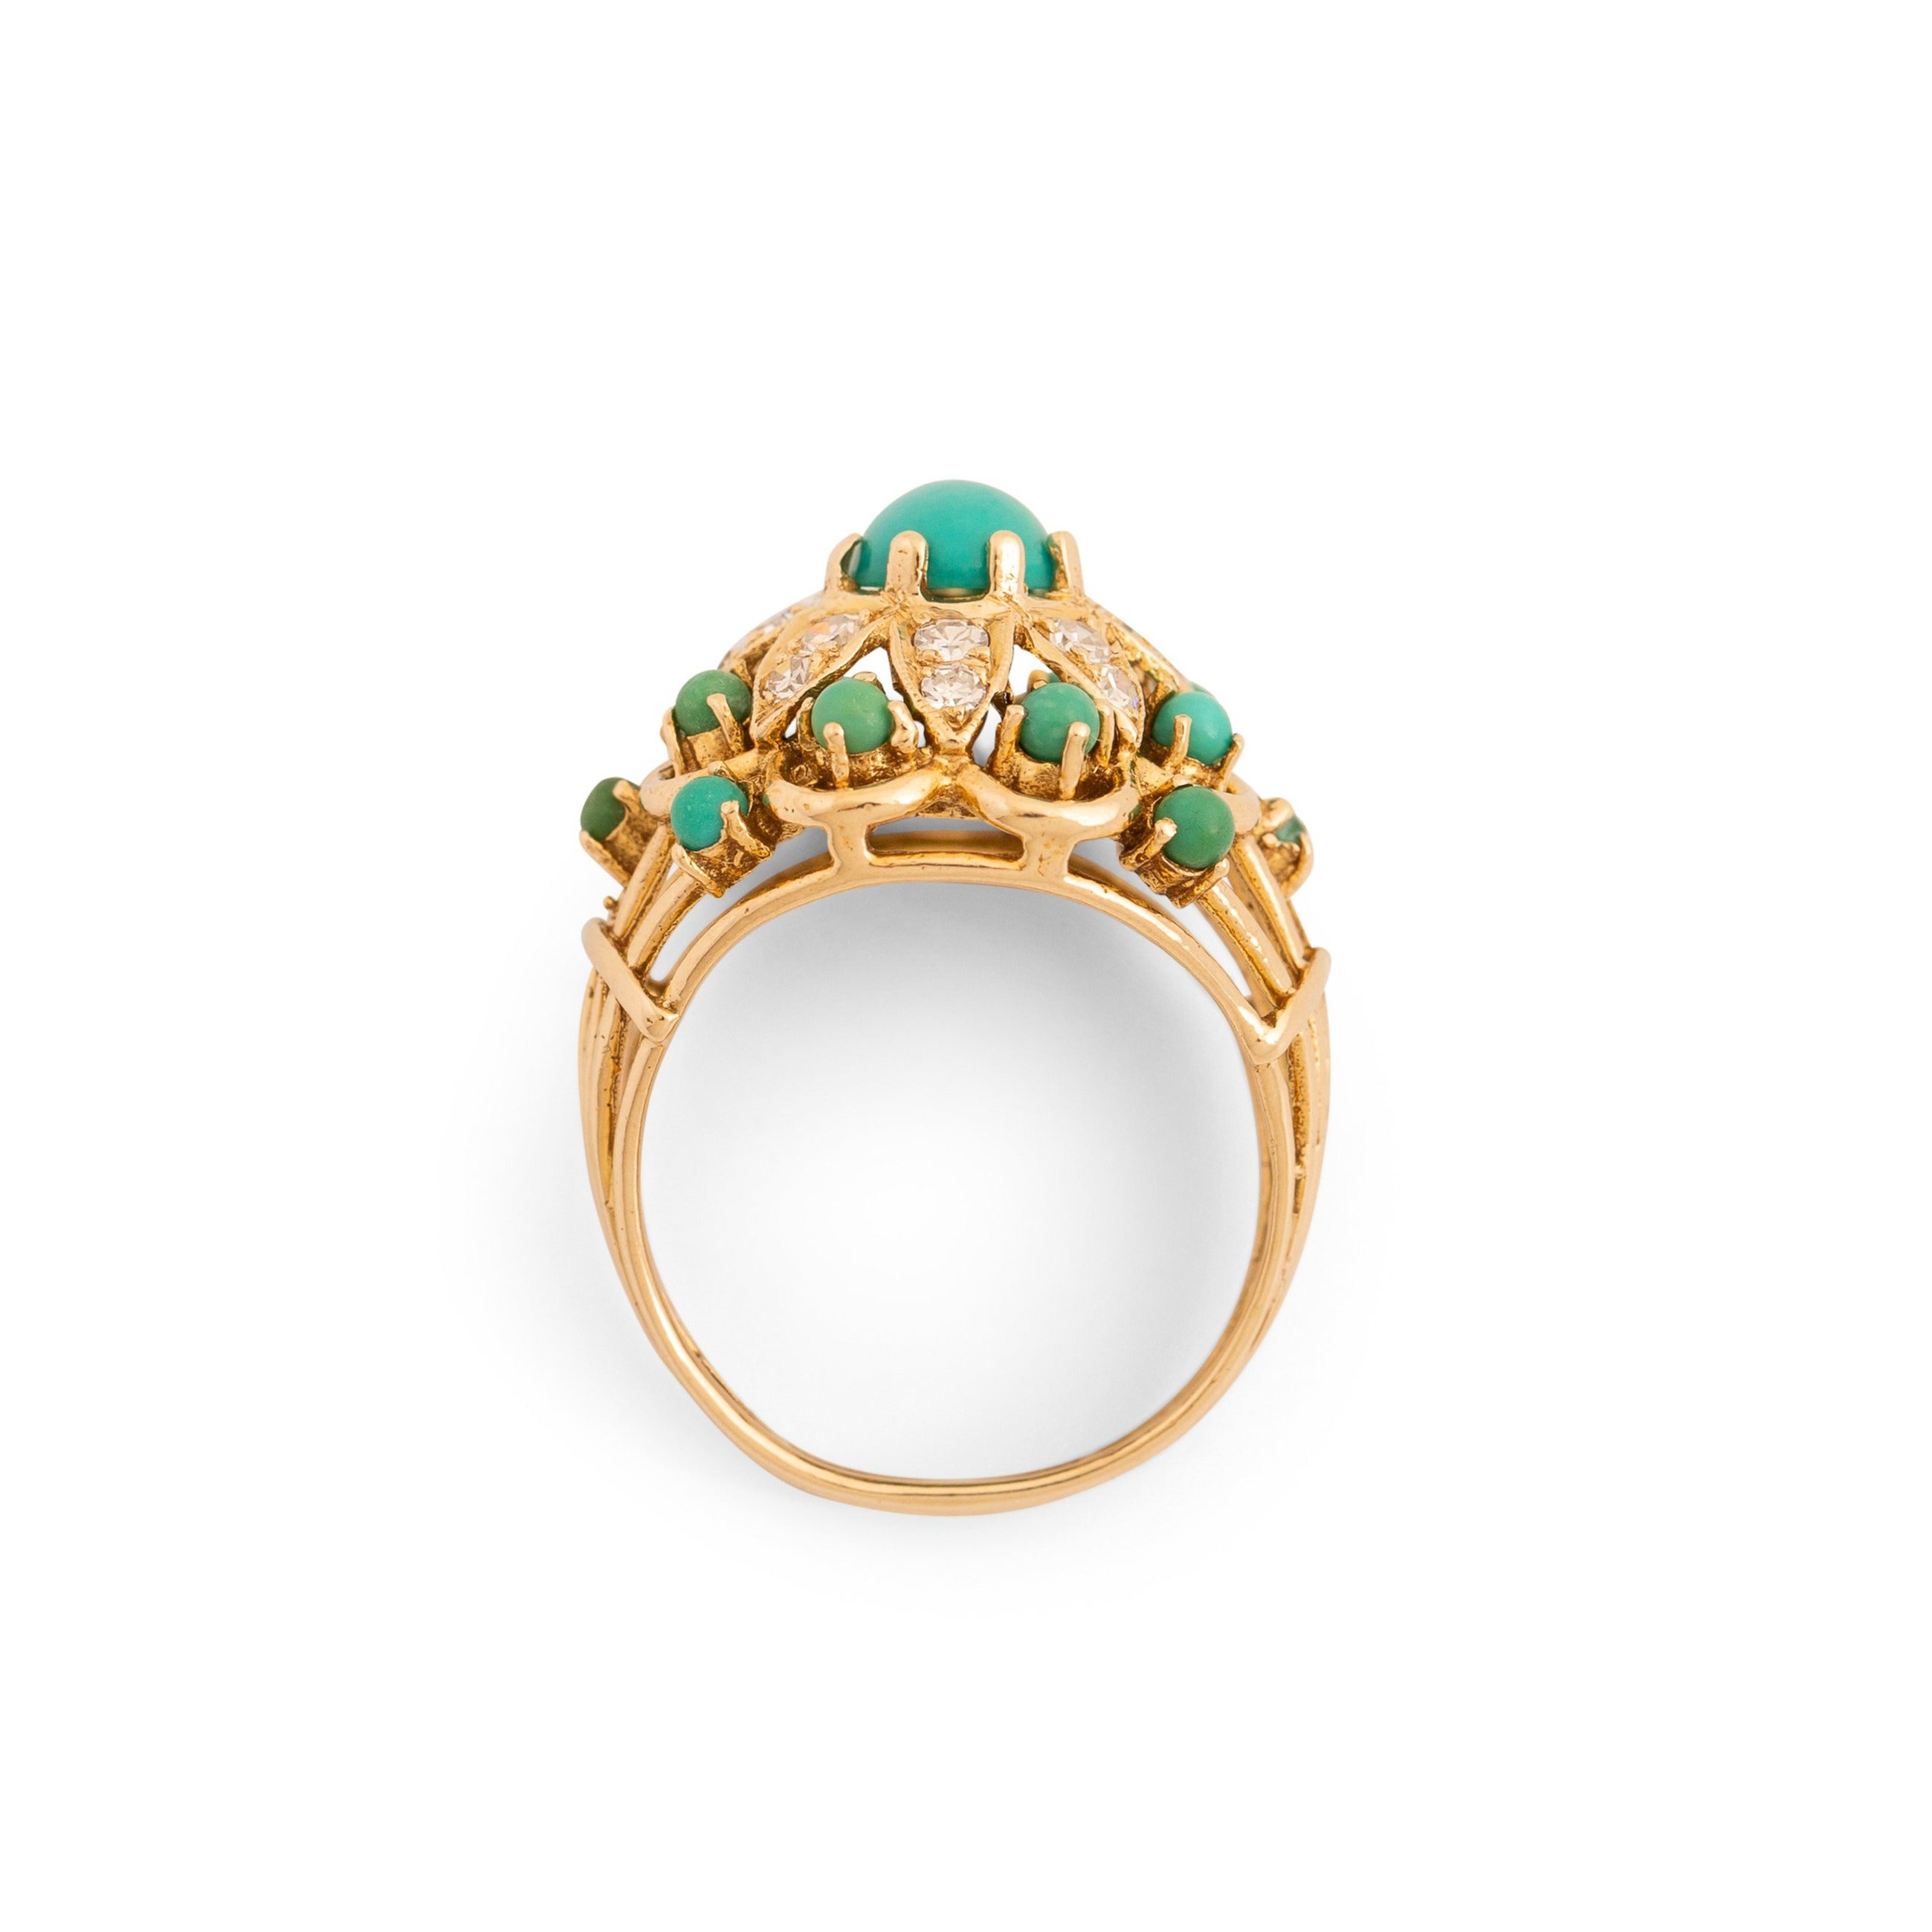 Turquoise, Diamond, and 14k Gold Cocktail Ring